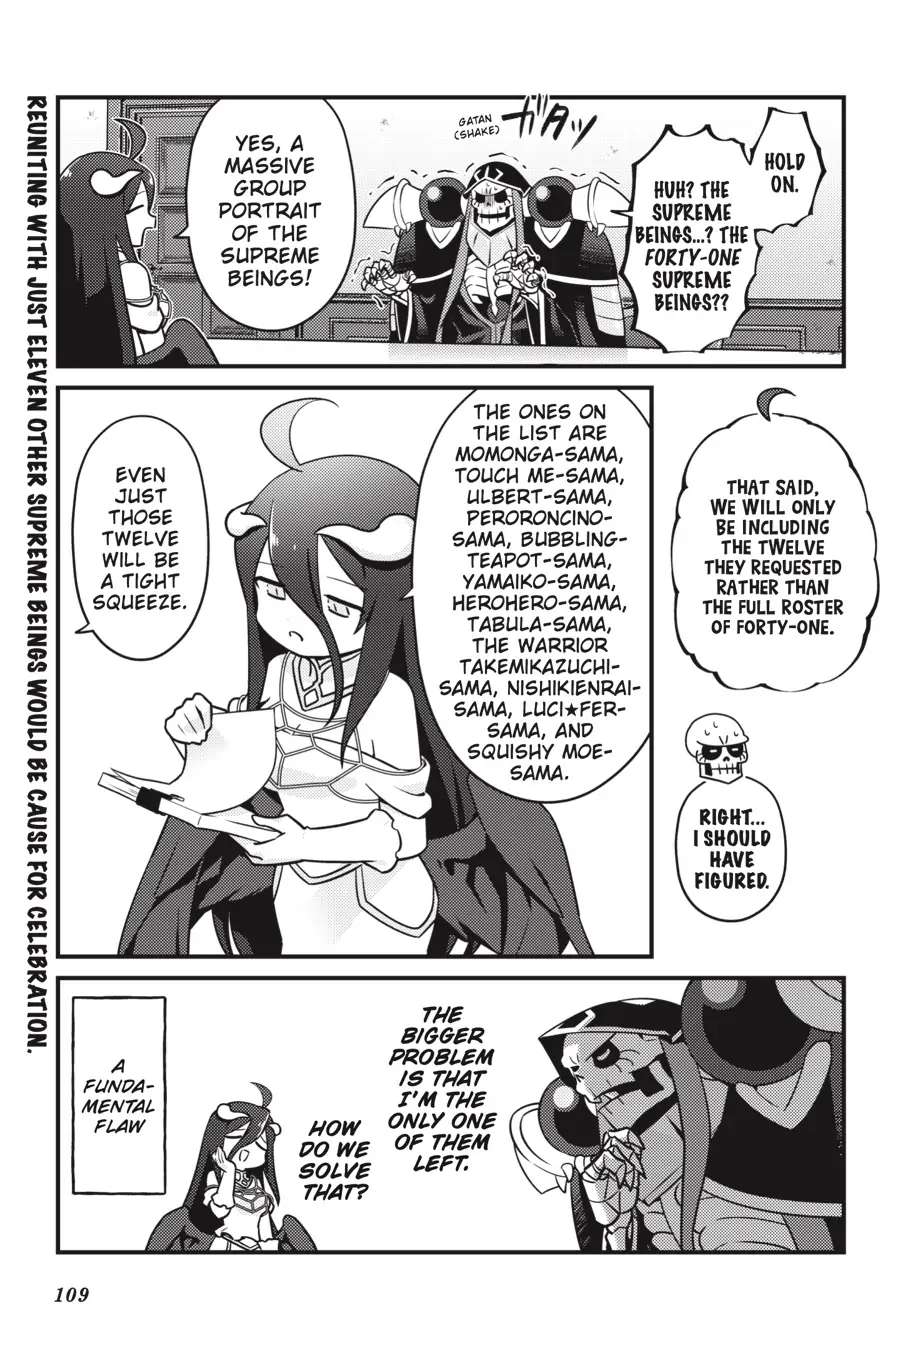 Overlord The Undead King Oh! - Page 3